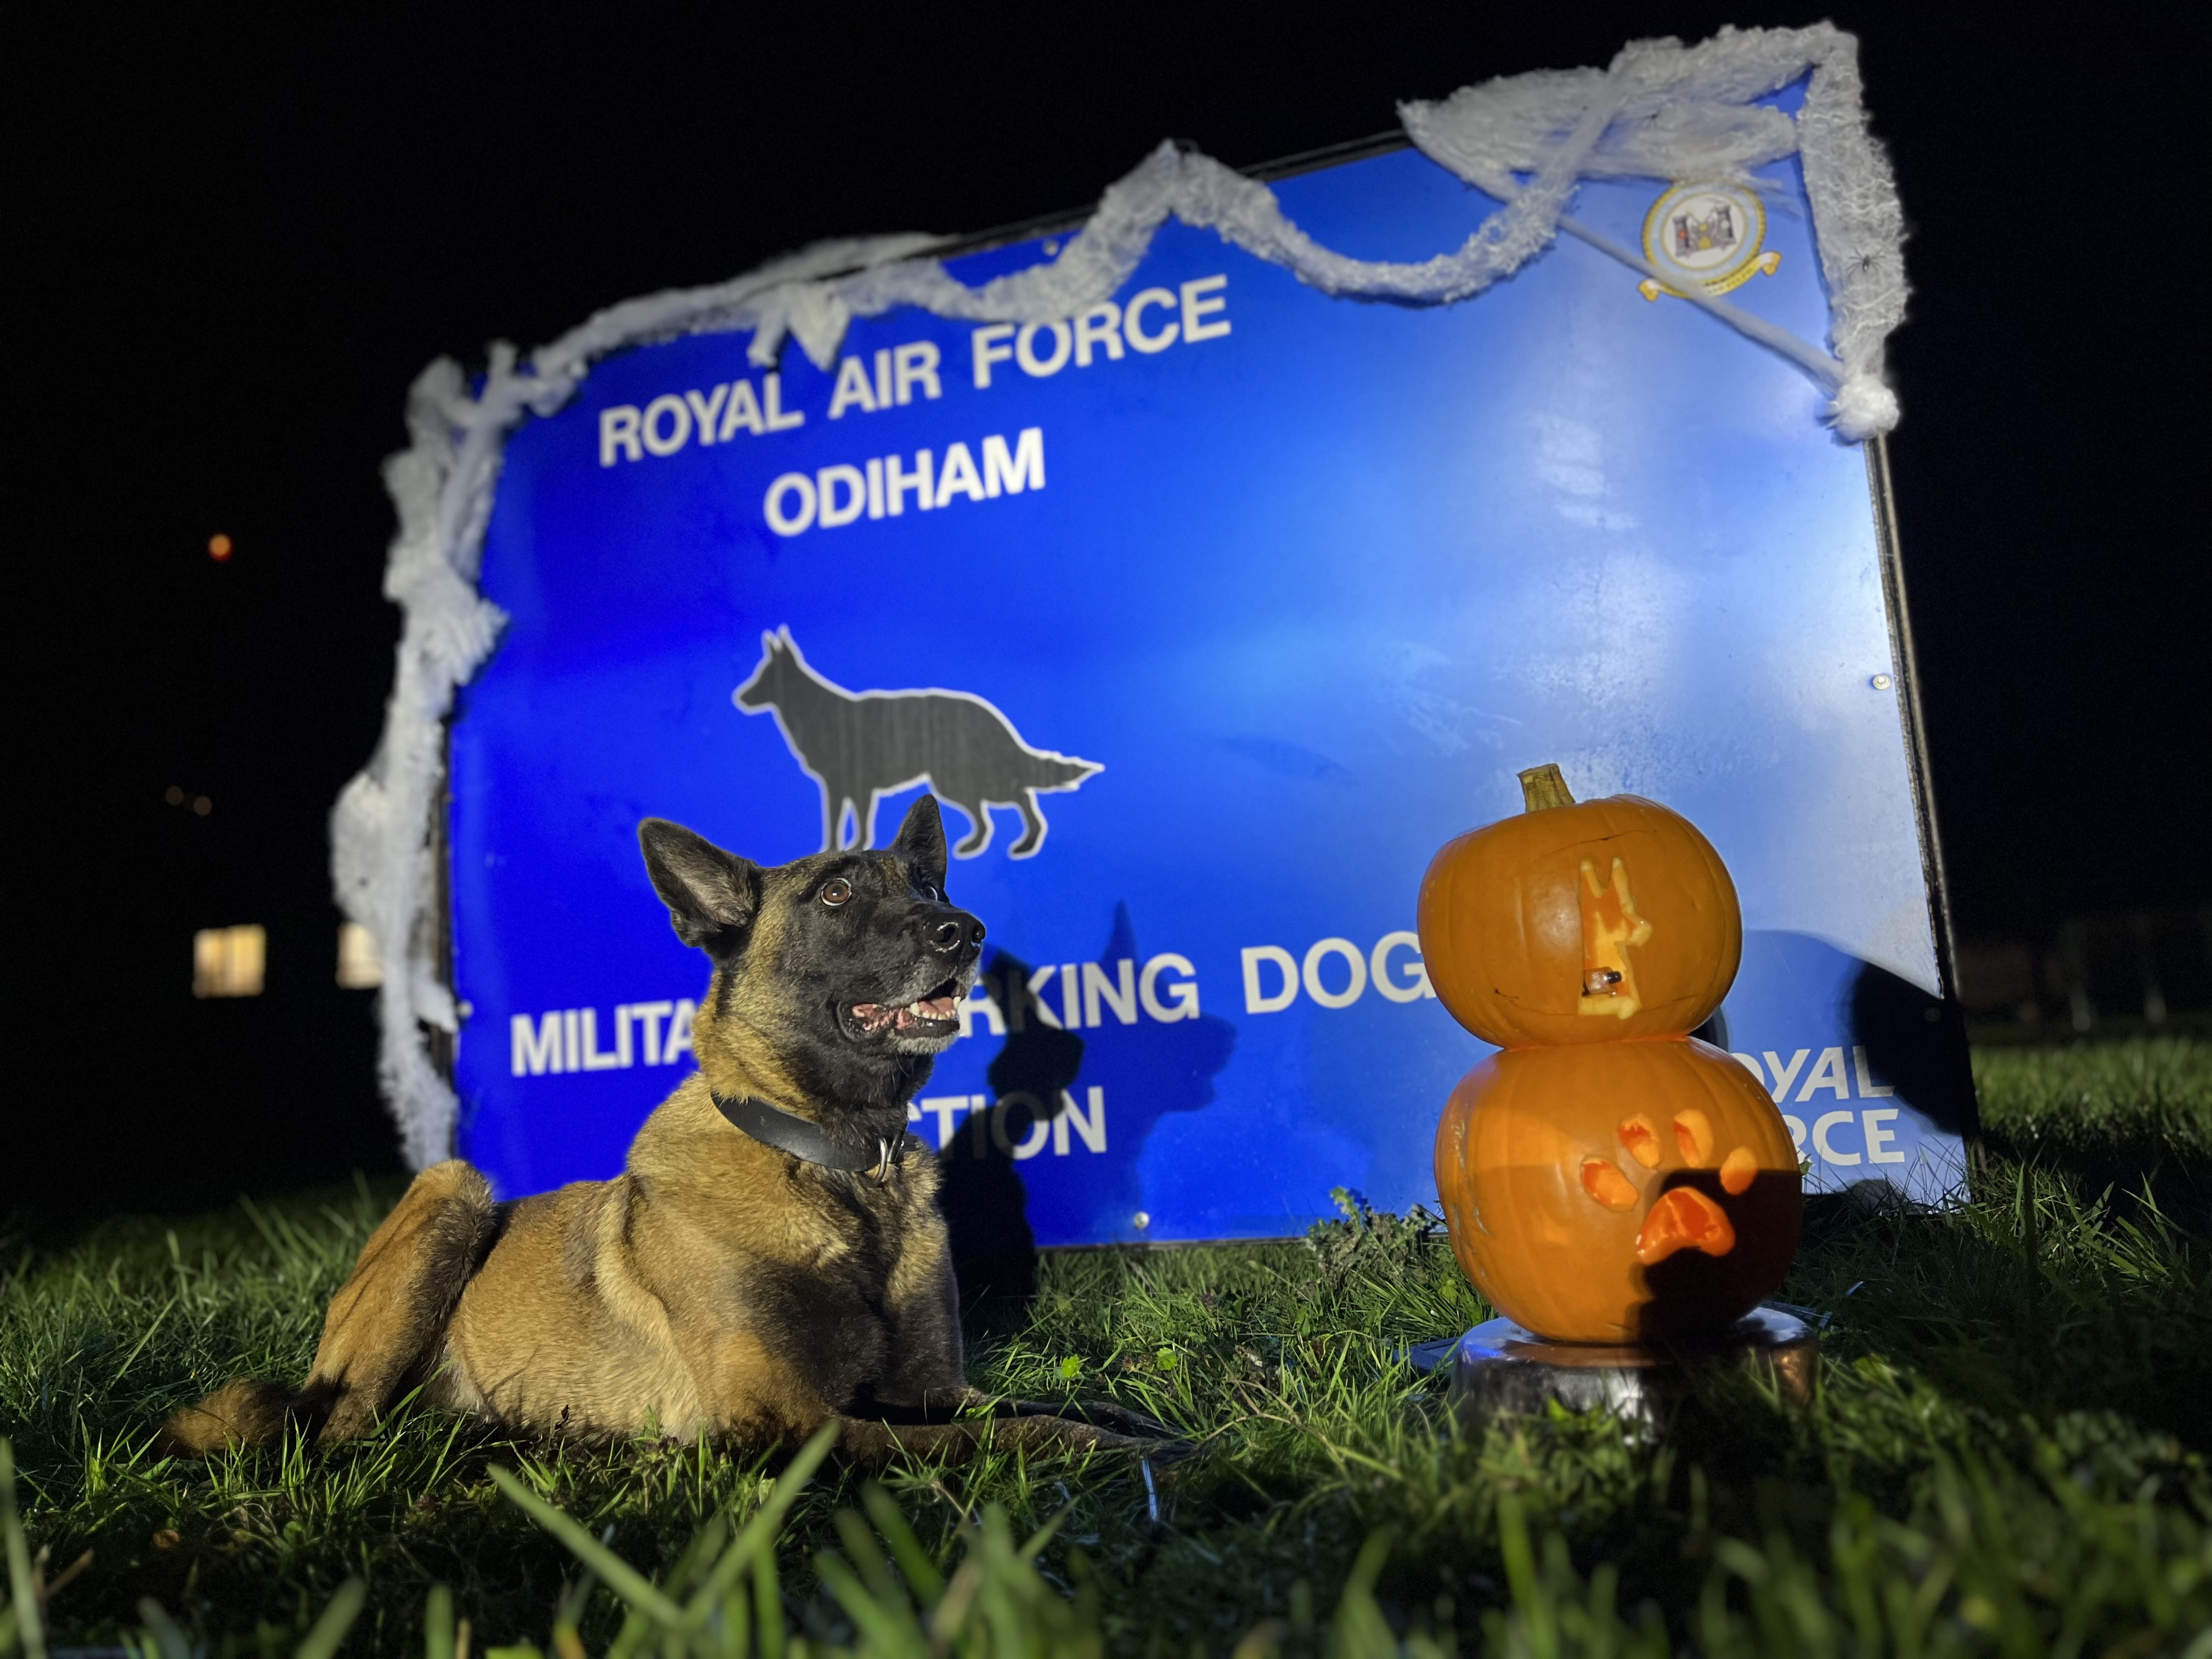 Image shows Military Working Dog sitting by a sign for RAF Odiham and pumpkins.